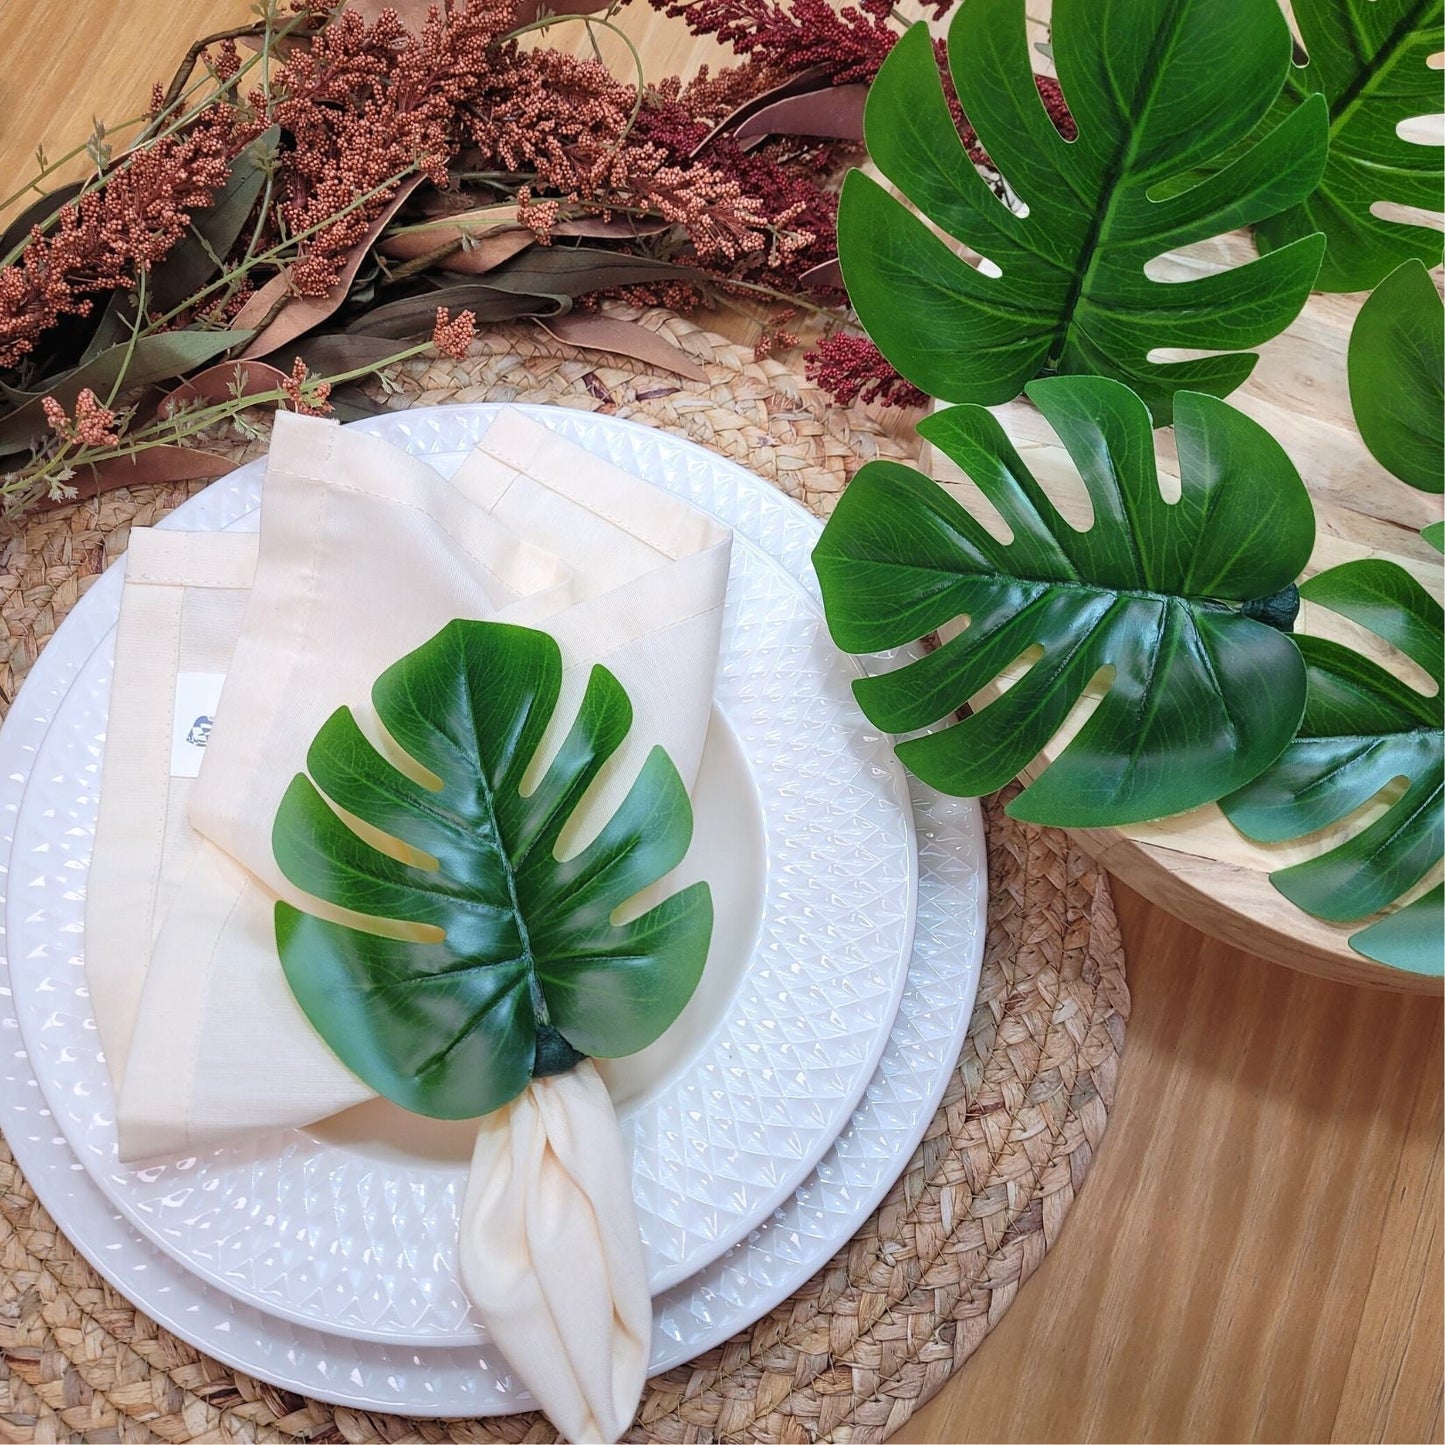 Charlo's Set 12 Green Monstera Leaf Tropical Napkin Rings Ecofriendly Pack for dining table decor